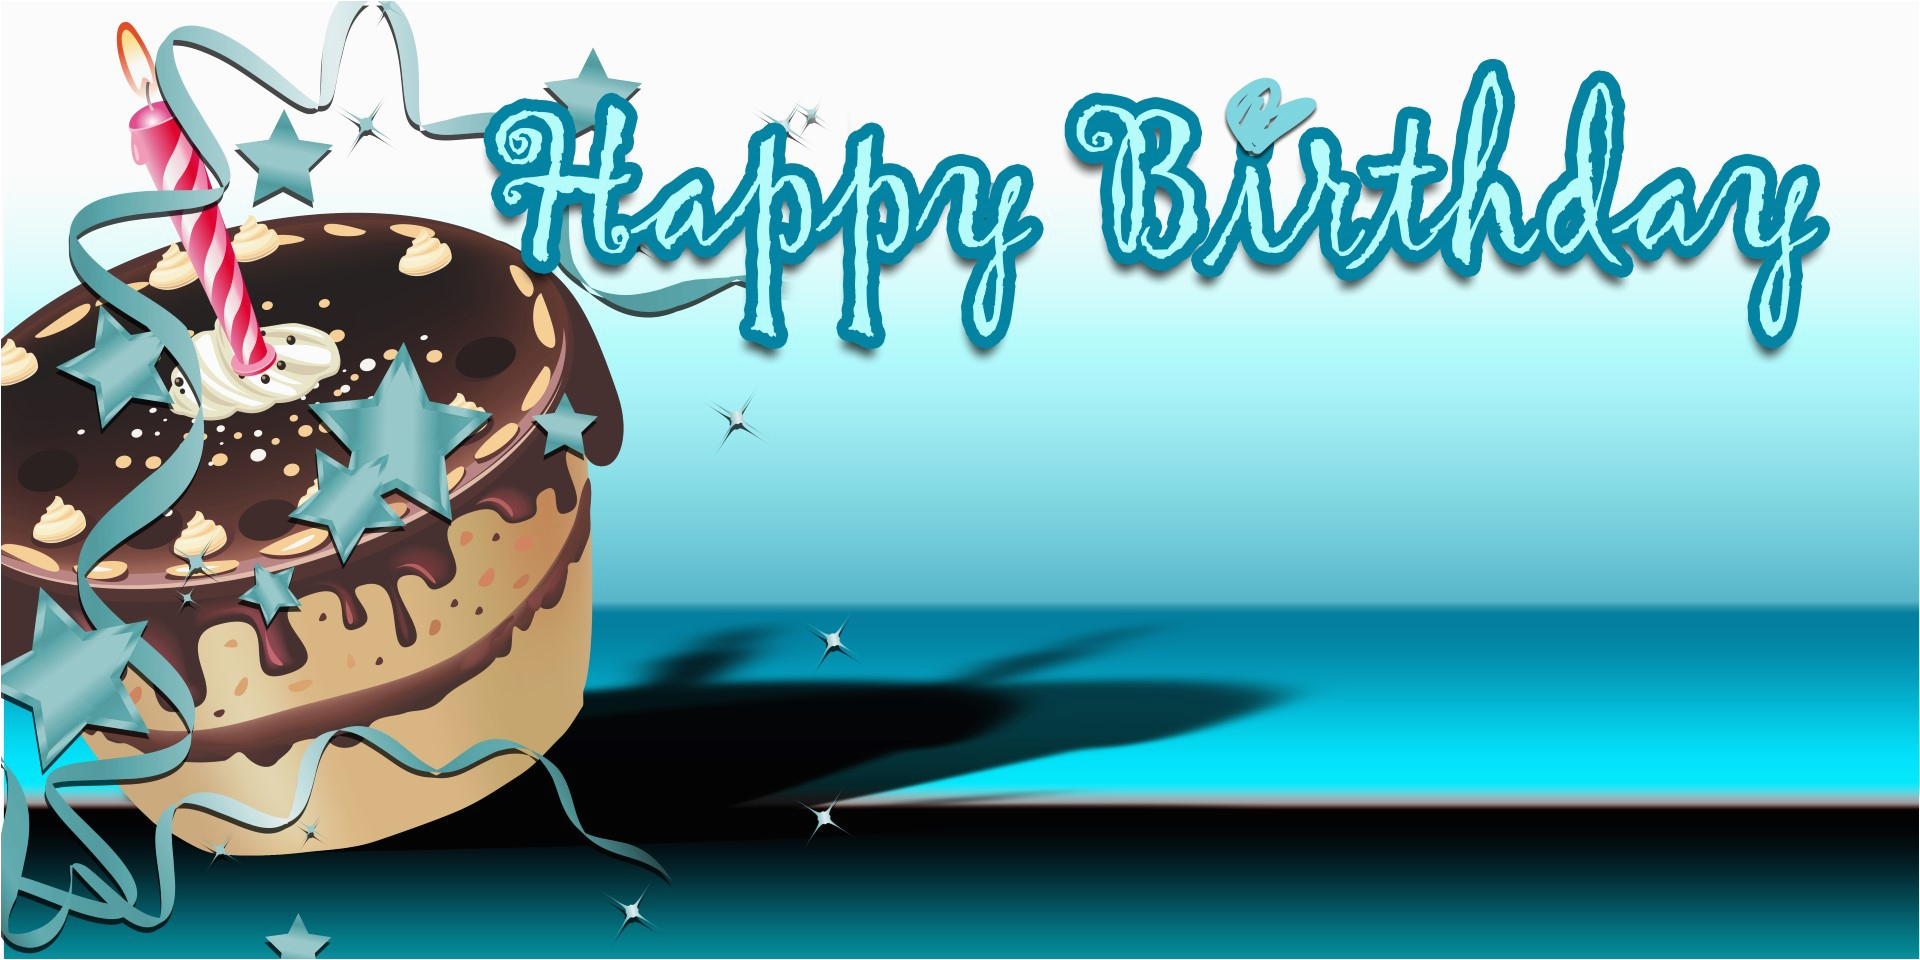 Happy Birthday Cake Banner Target Birthday Banners Cake Teal